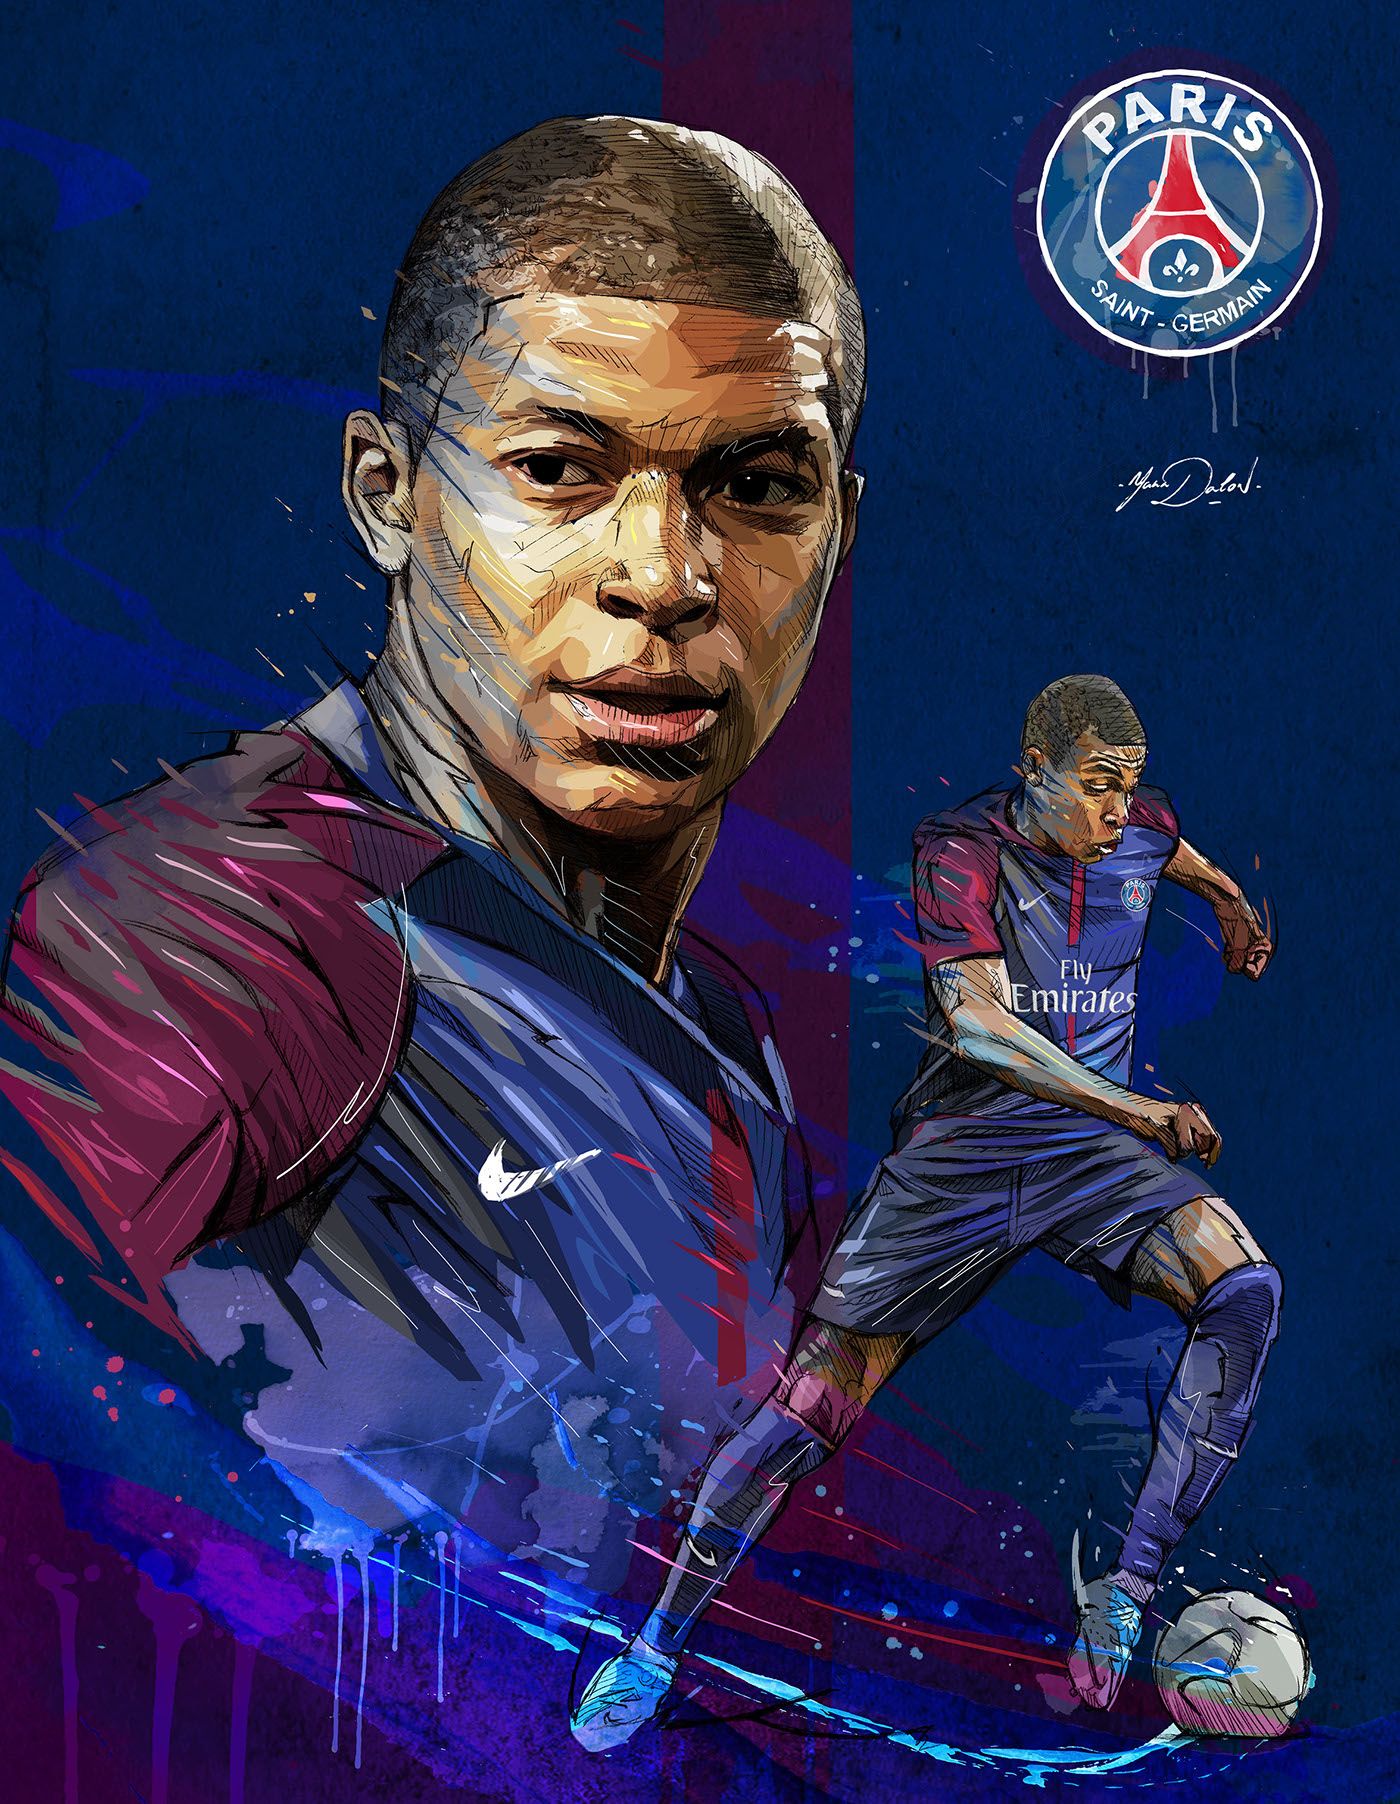 My painting of Kylian Mbapp young soccer player of the PSG